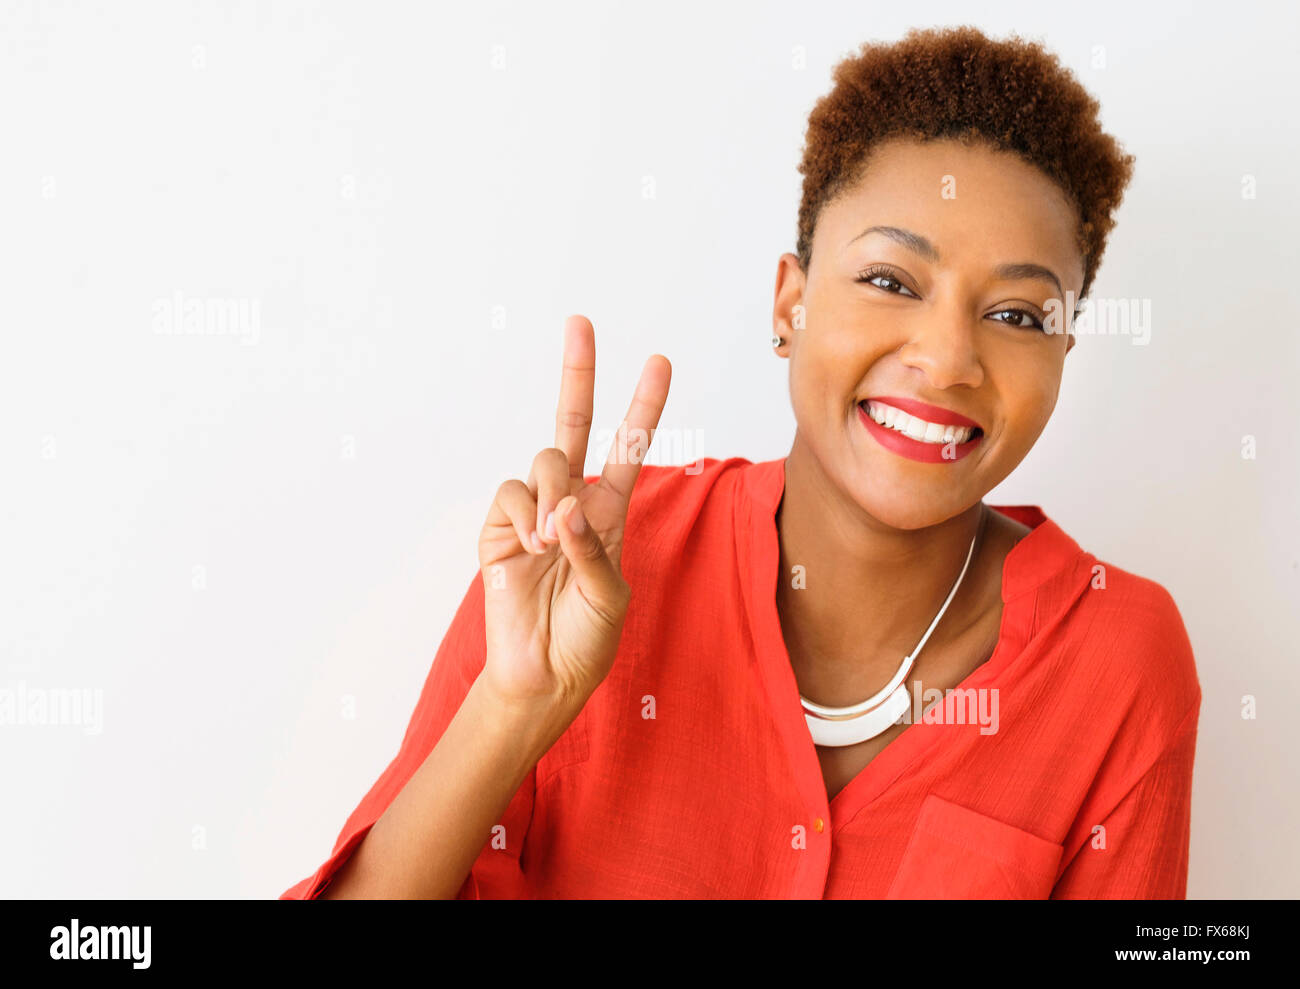 Mixed race woman making peace sign Stock Photo